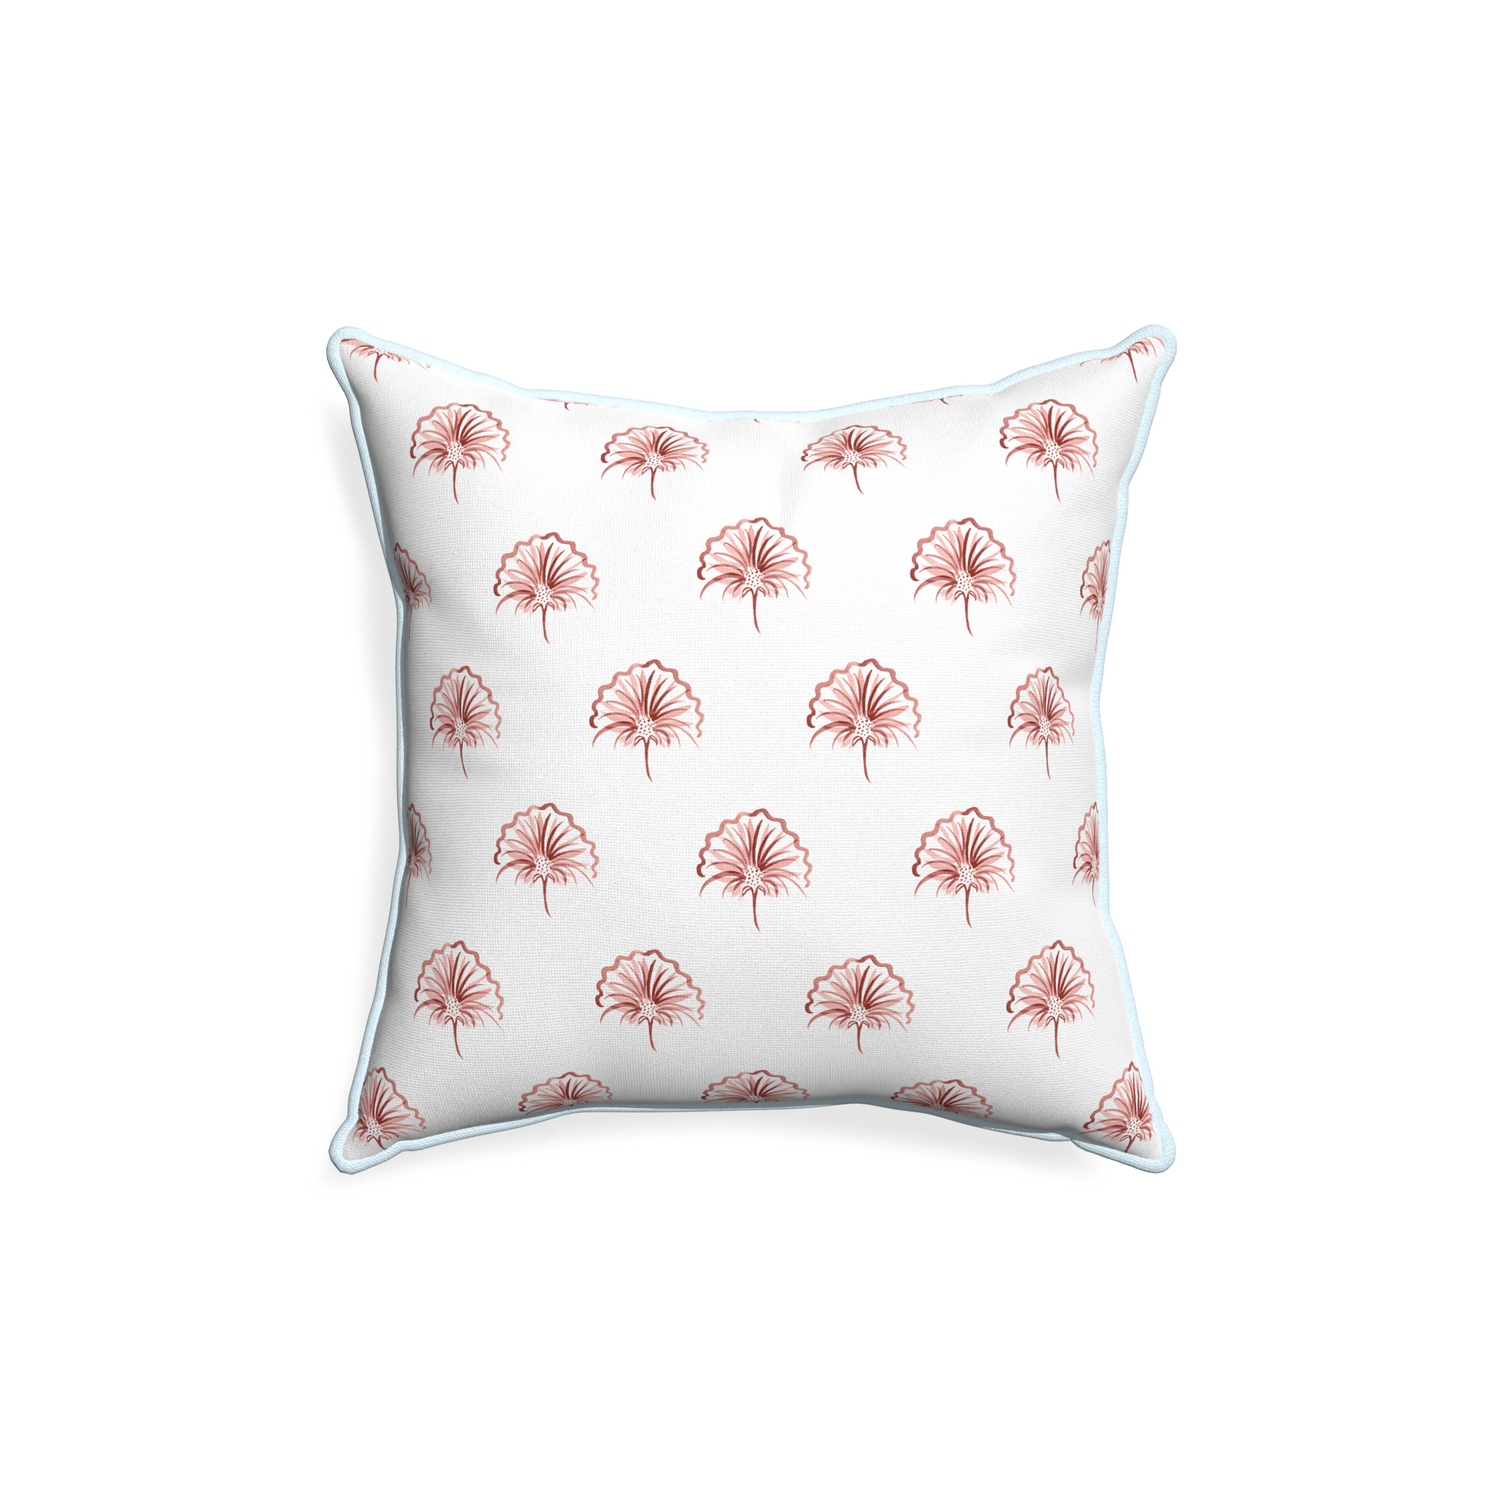 18-square penelope rose custom floral pinkpillow with powder piping on white background